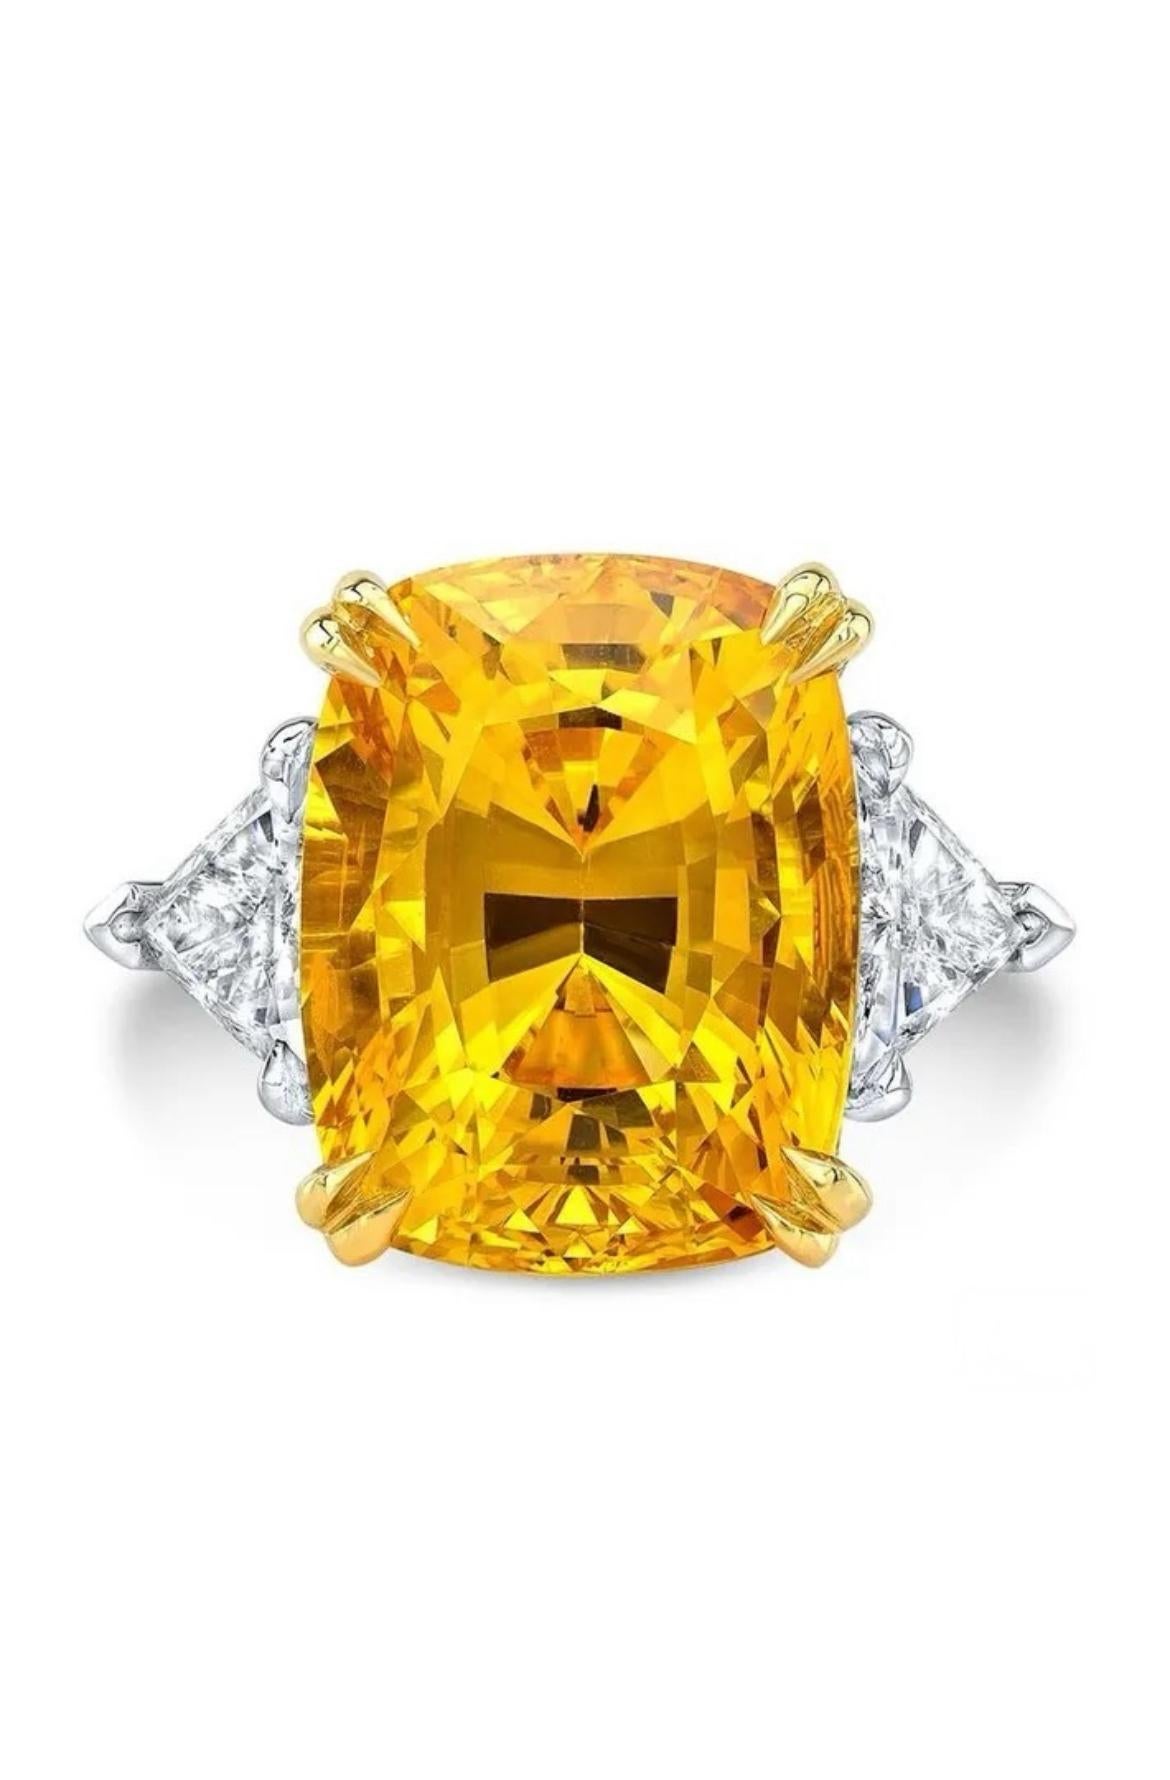 Antique Cushion Cut 15.83ct GIA certified, yellow sapphire ring in platinum with 18K yellow gold. For Sale